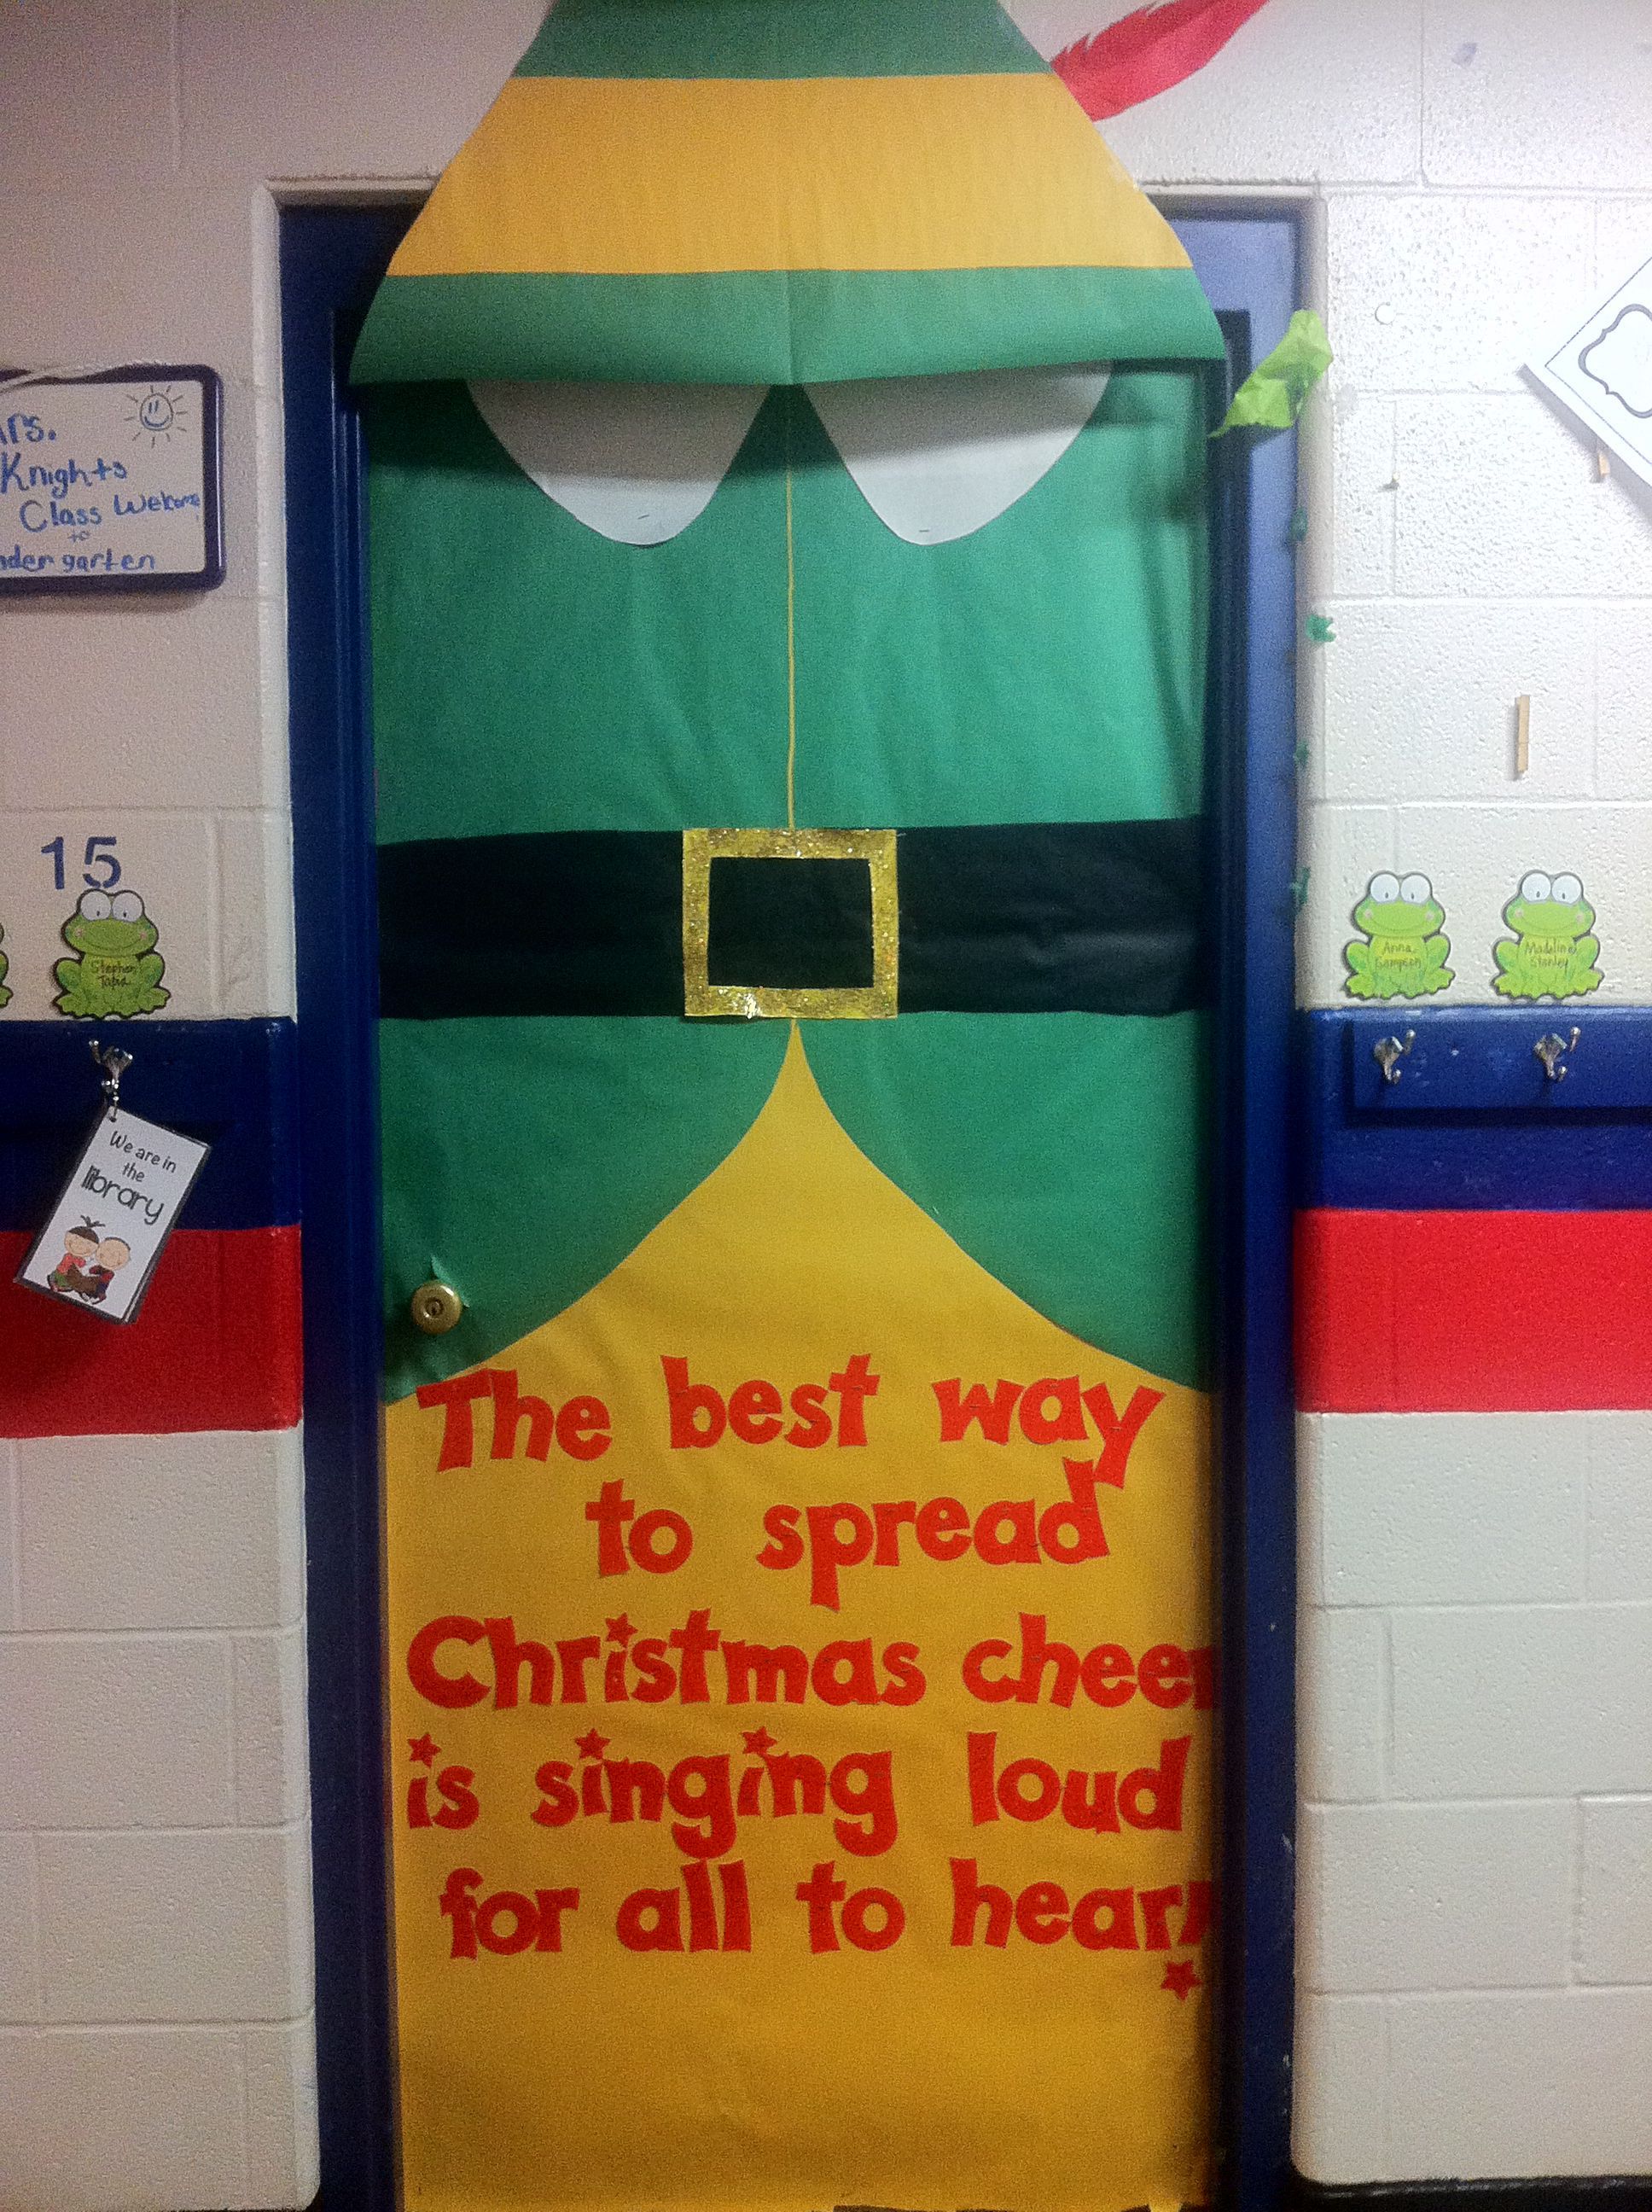 The best way to spread christmas cheer is decorating your door like Buddy the Elf!!